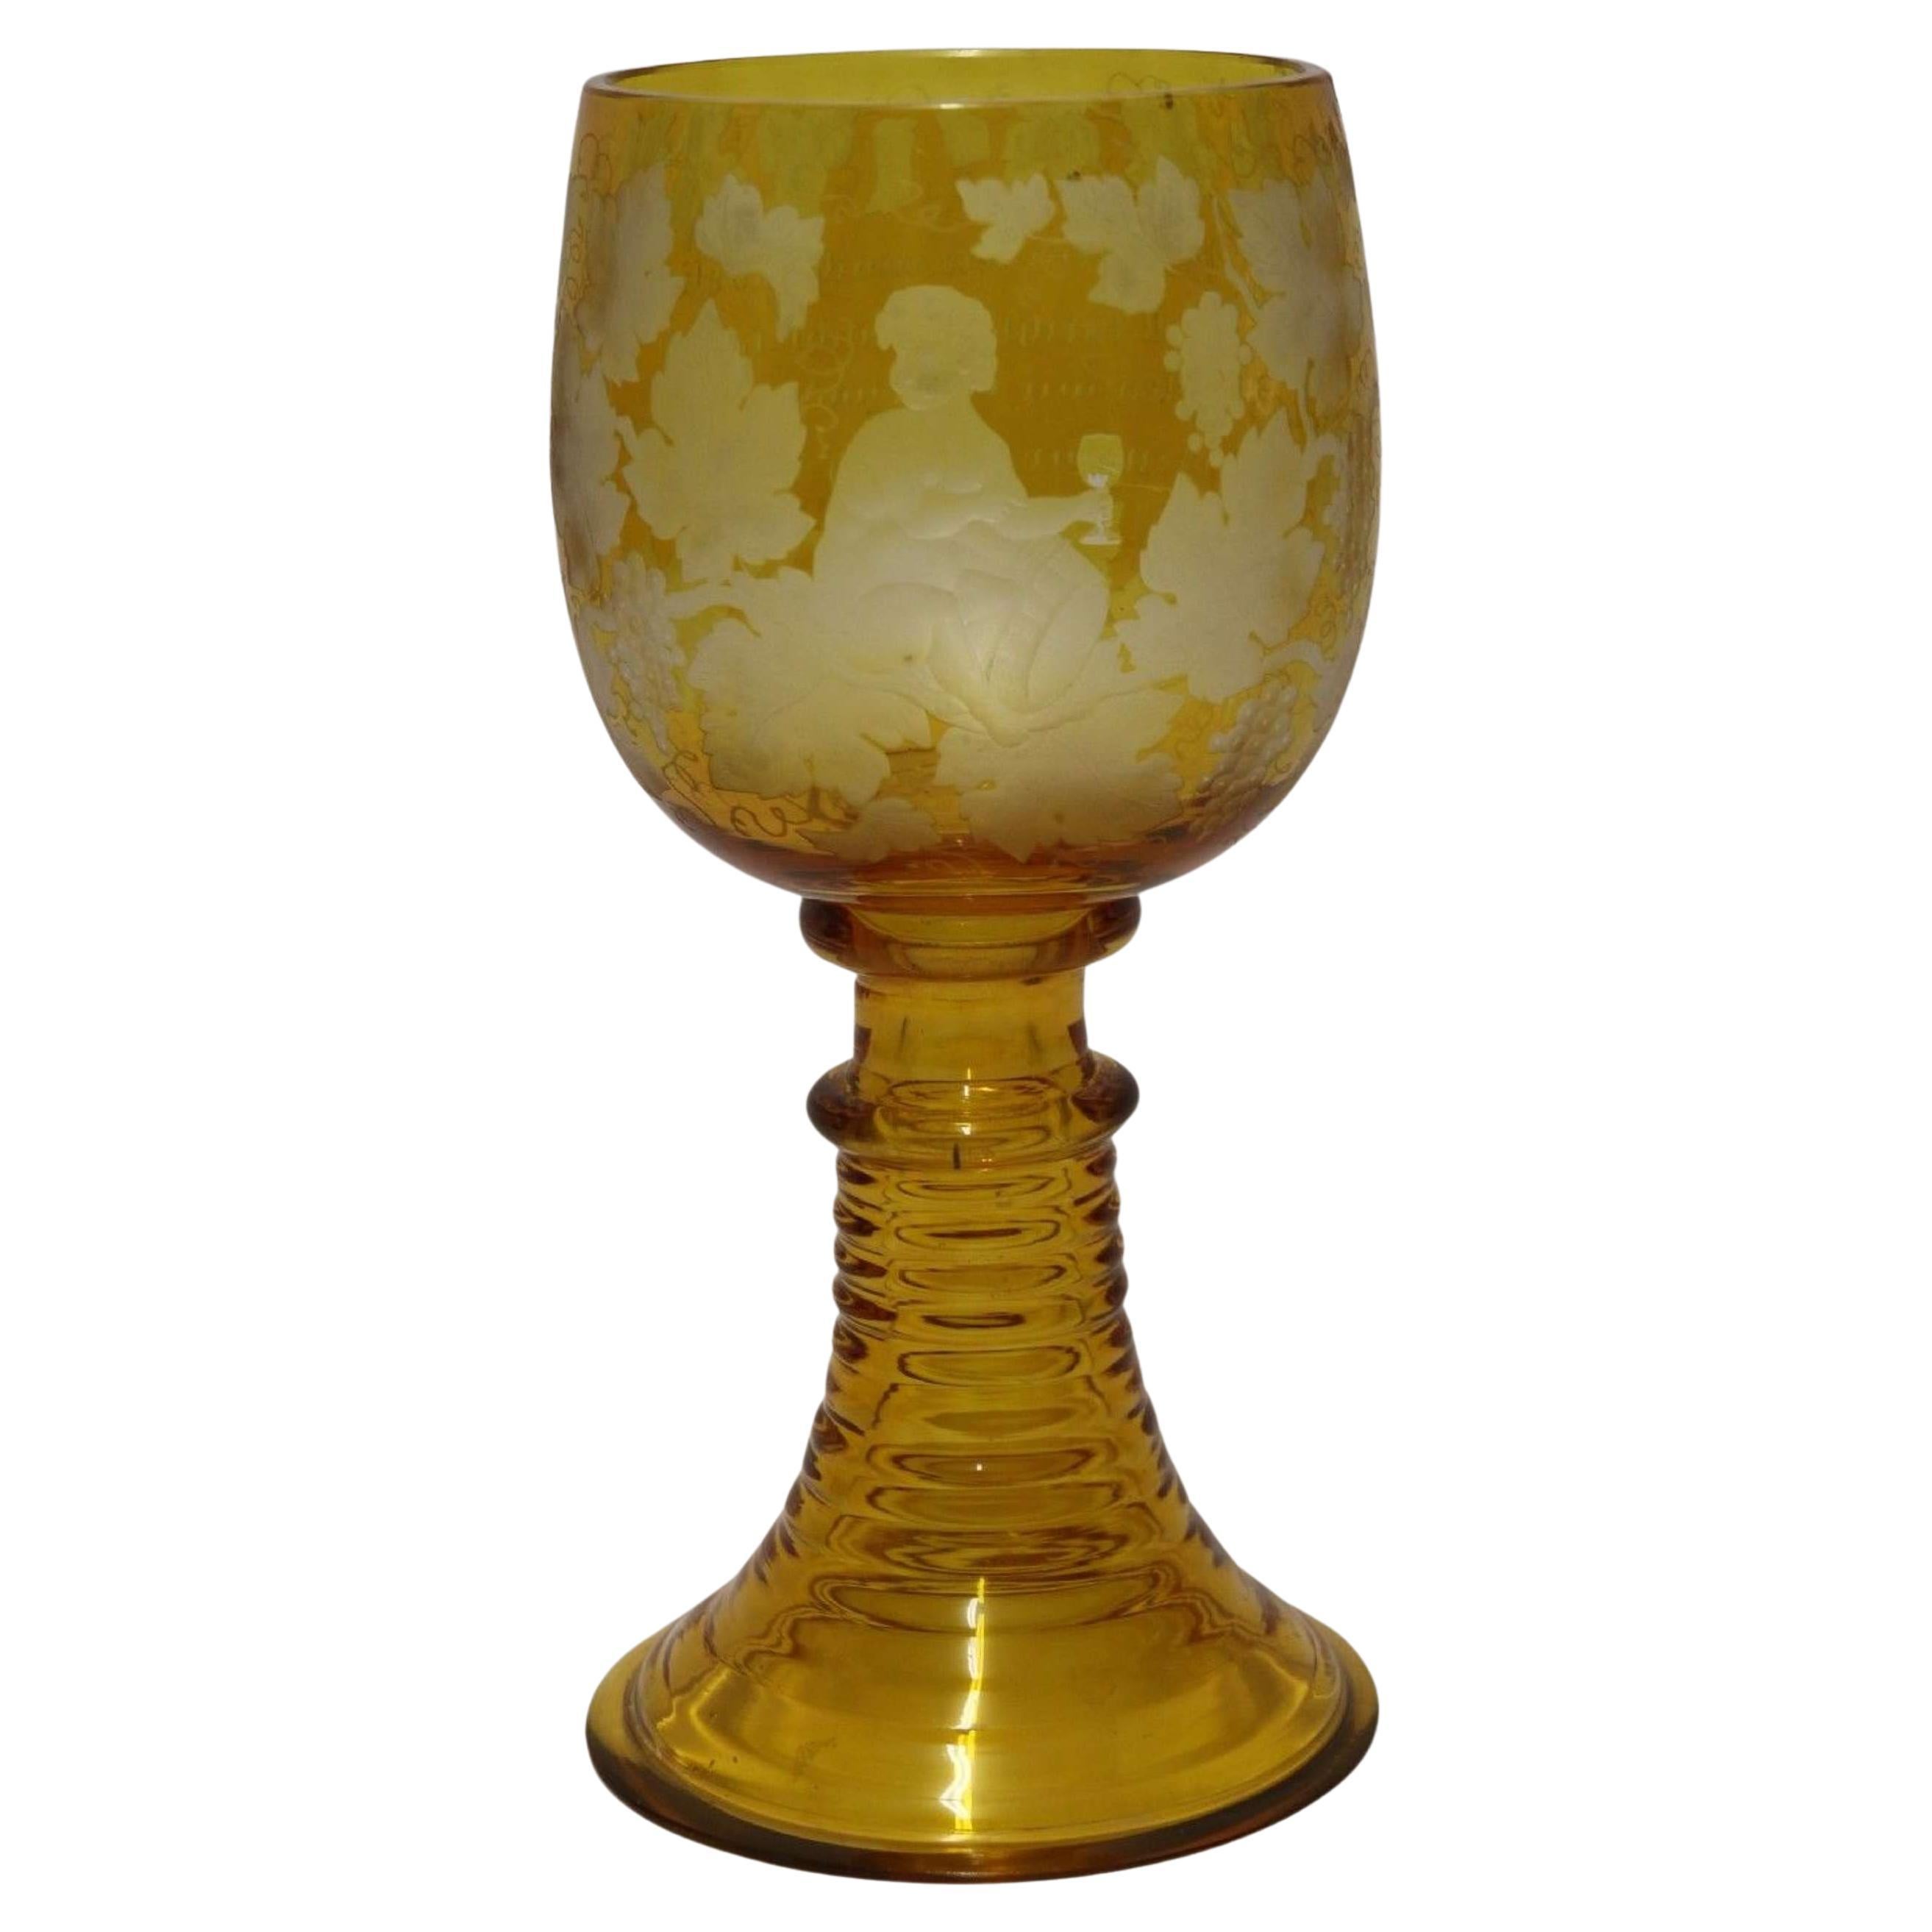 19th Century German Cut and Engraved Amber Glass Engraved Goblet, circa 1880